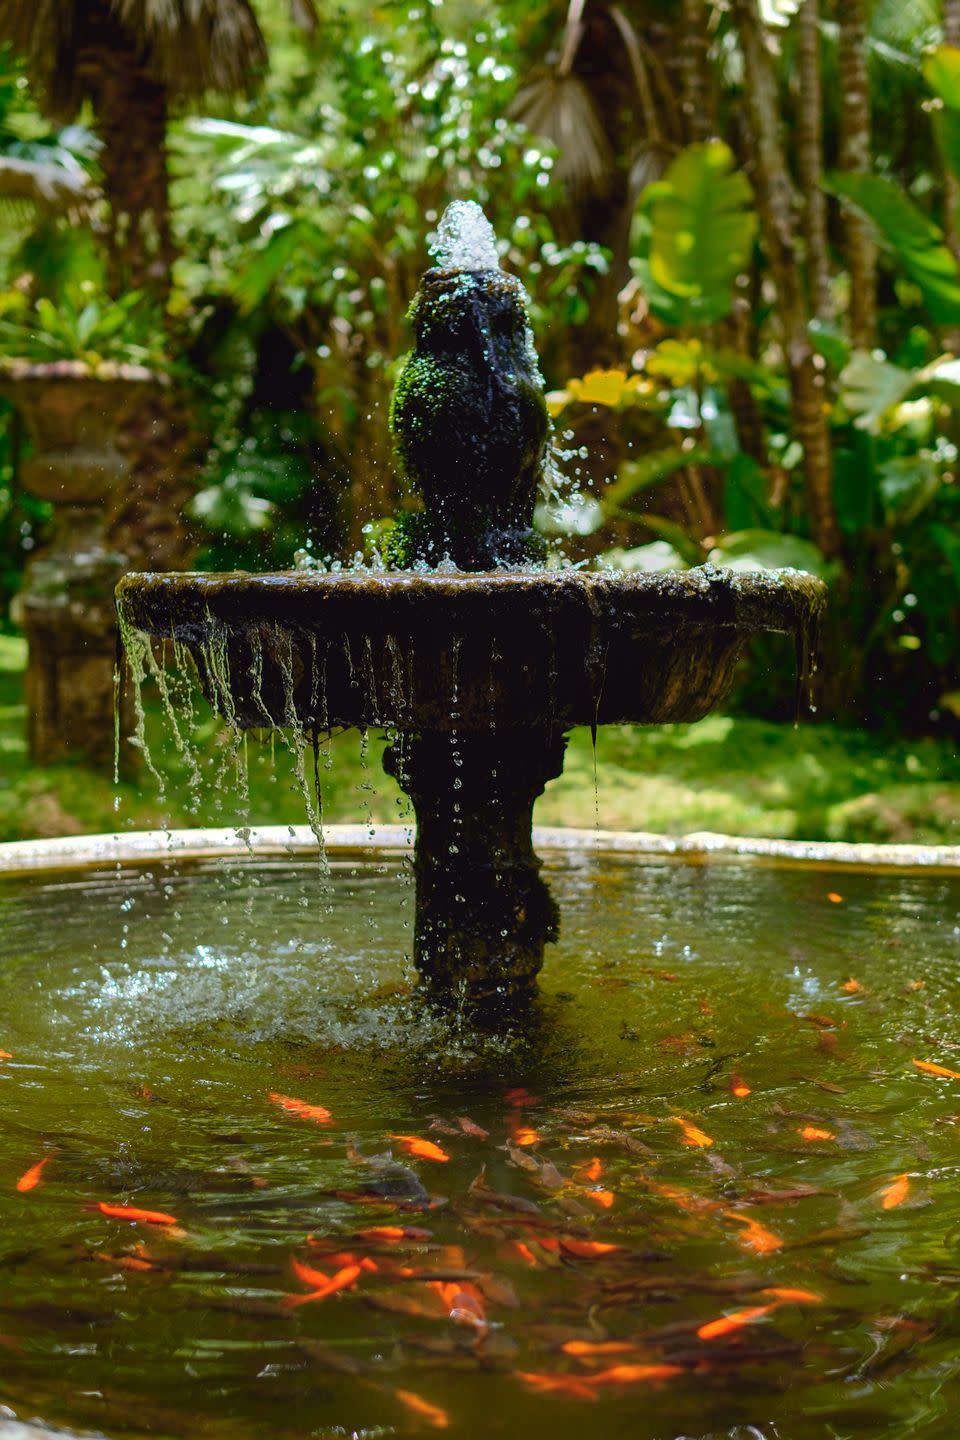 fountain with golden fishes in parque terra nostra, furnas, sao miguel, azores